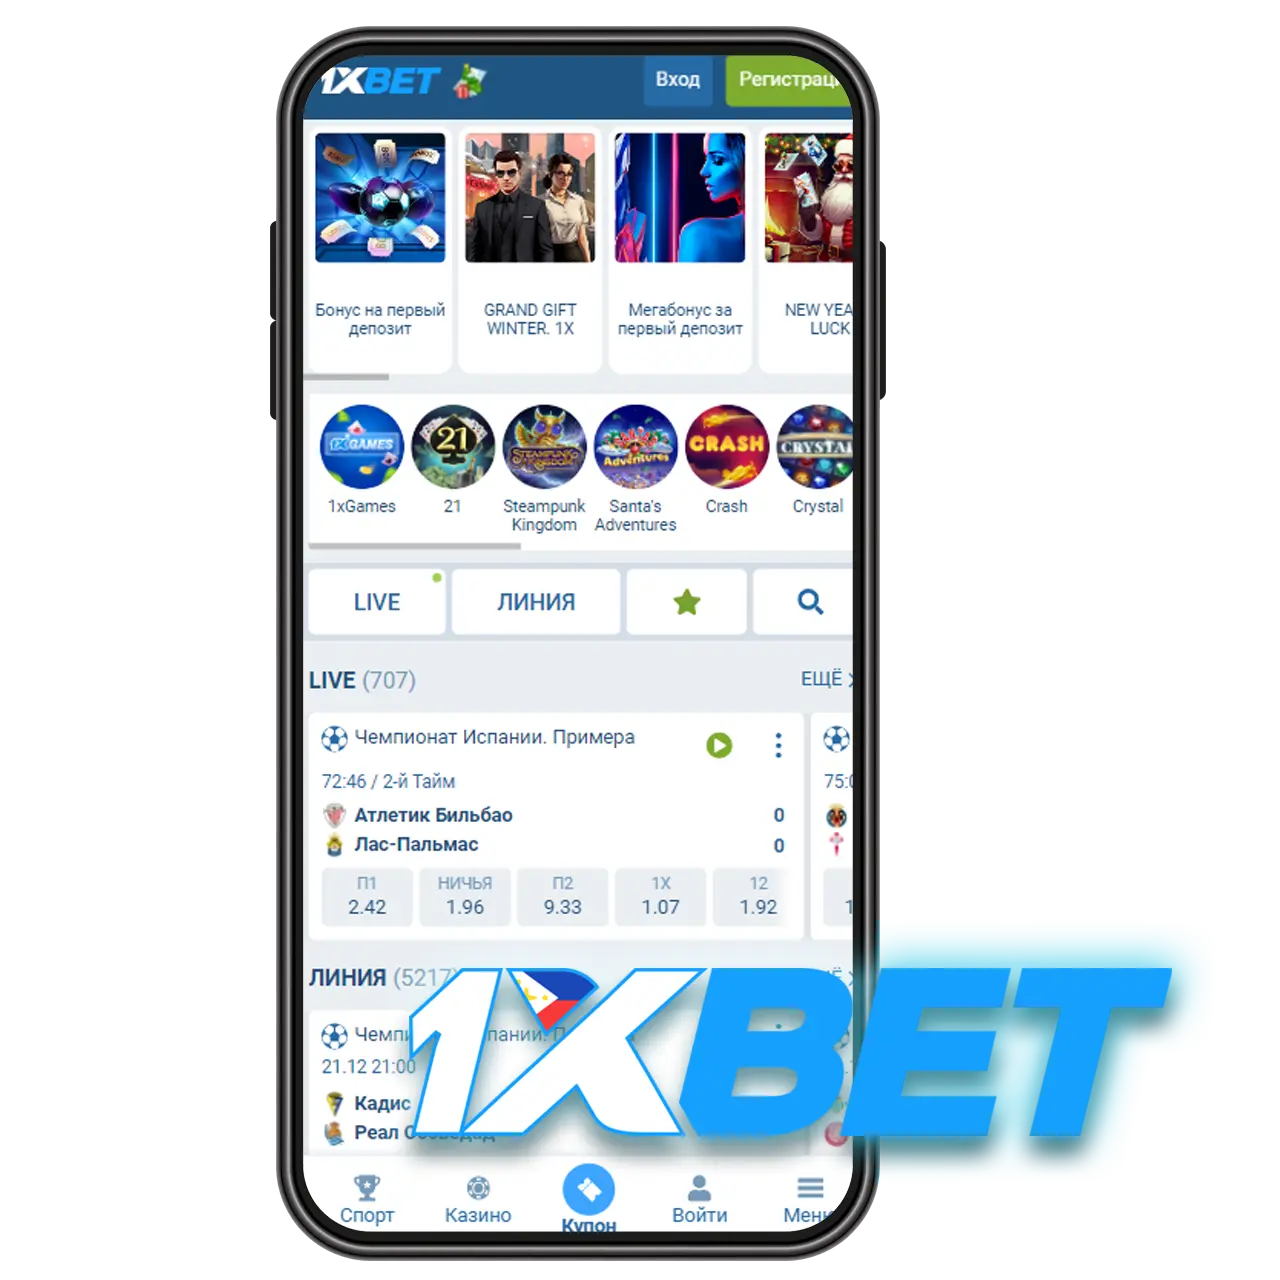 1xBet mobile app in the Philippines